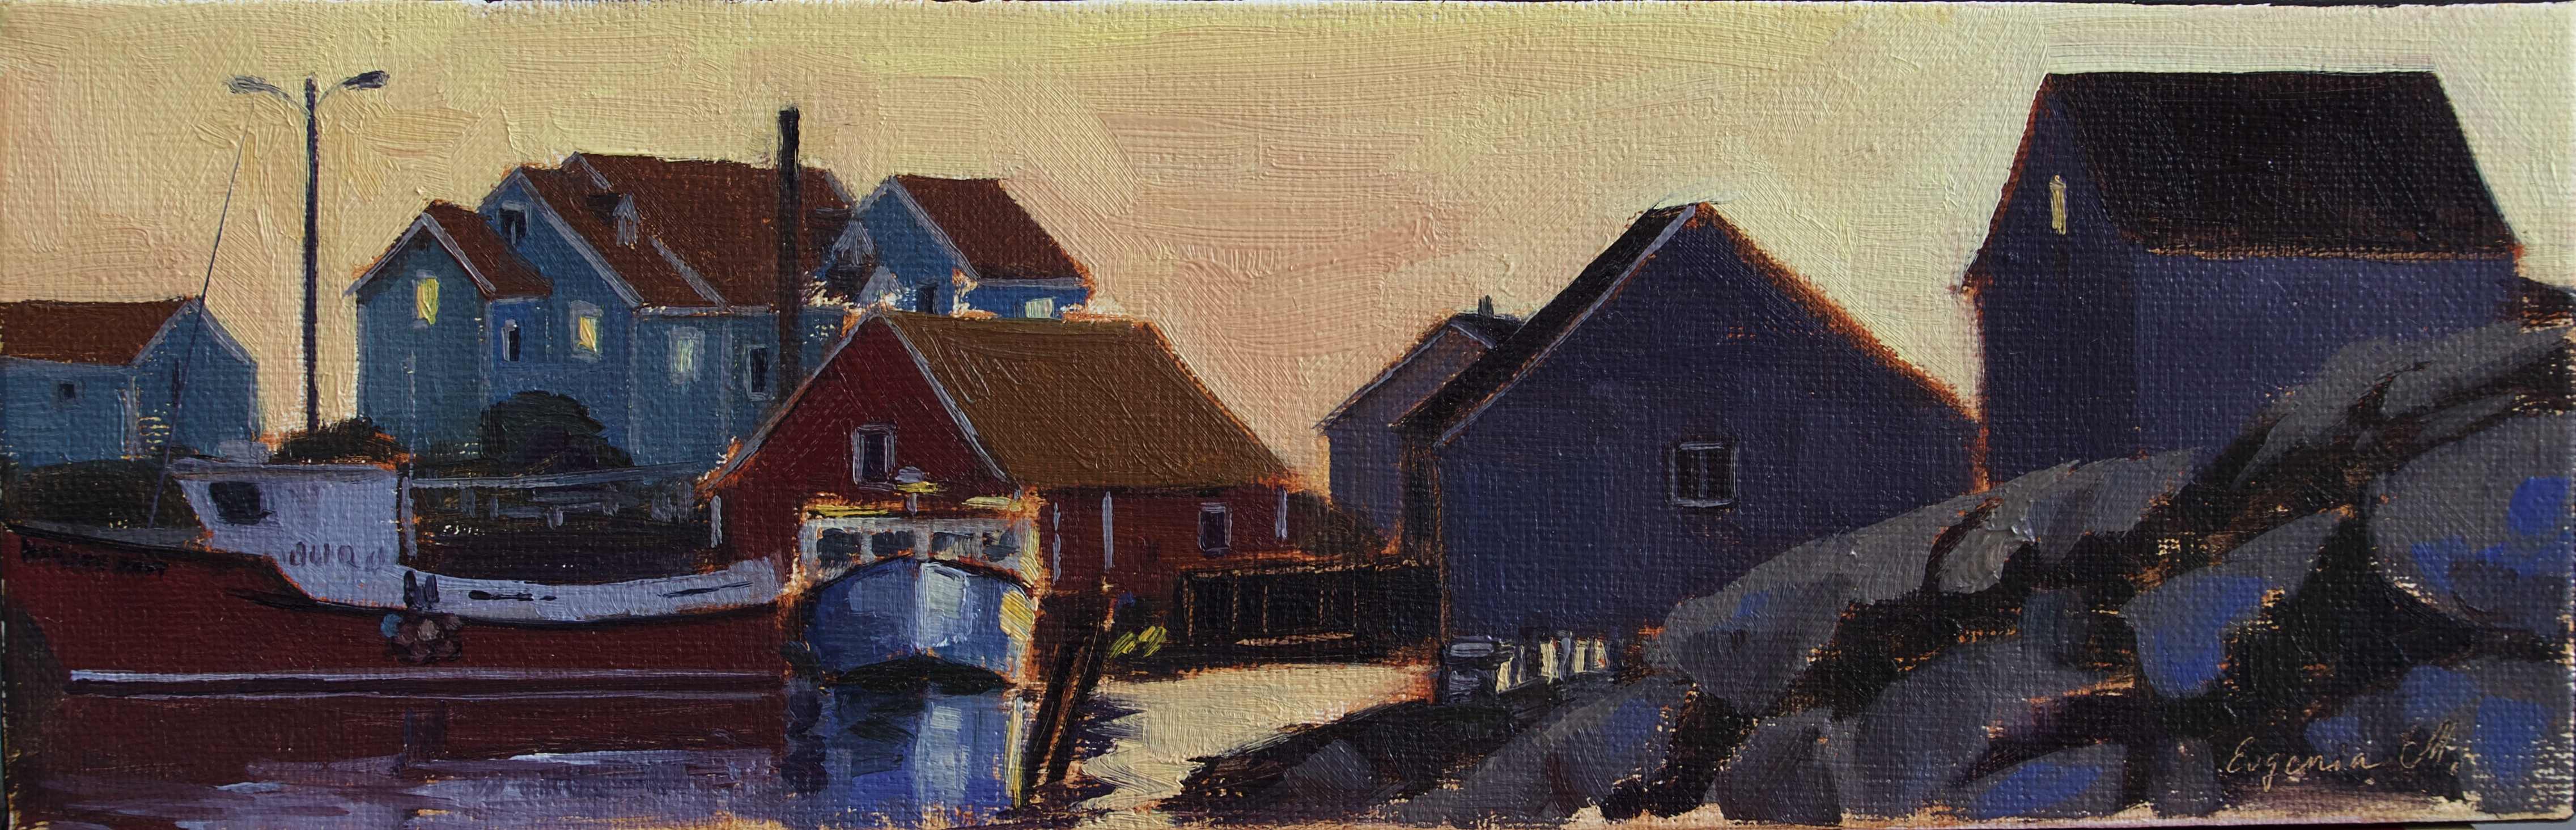 small painting of Peggy's cove harbour art sunset